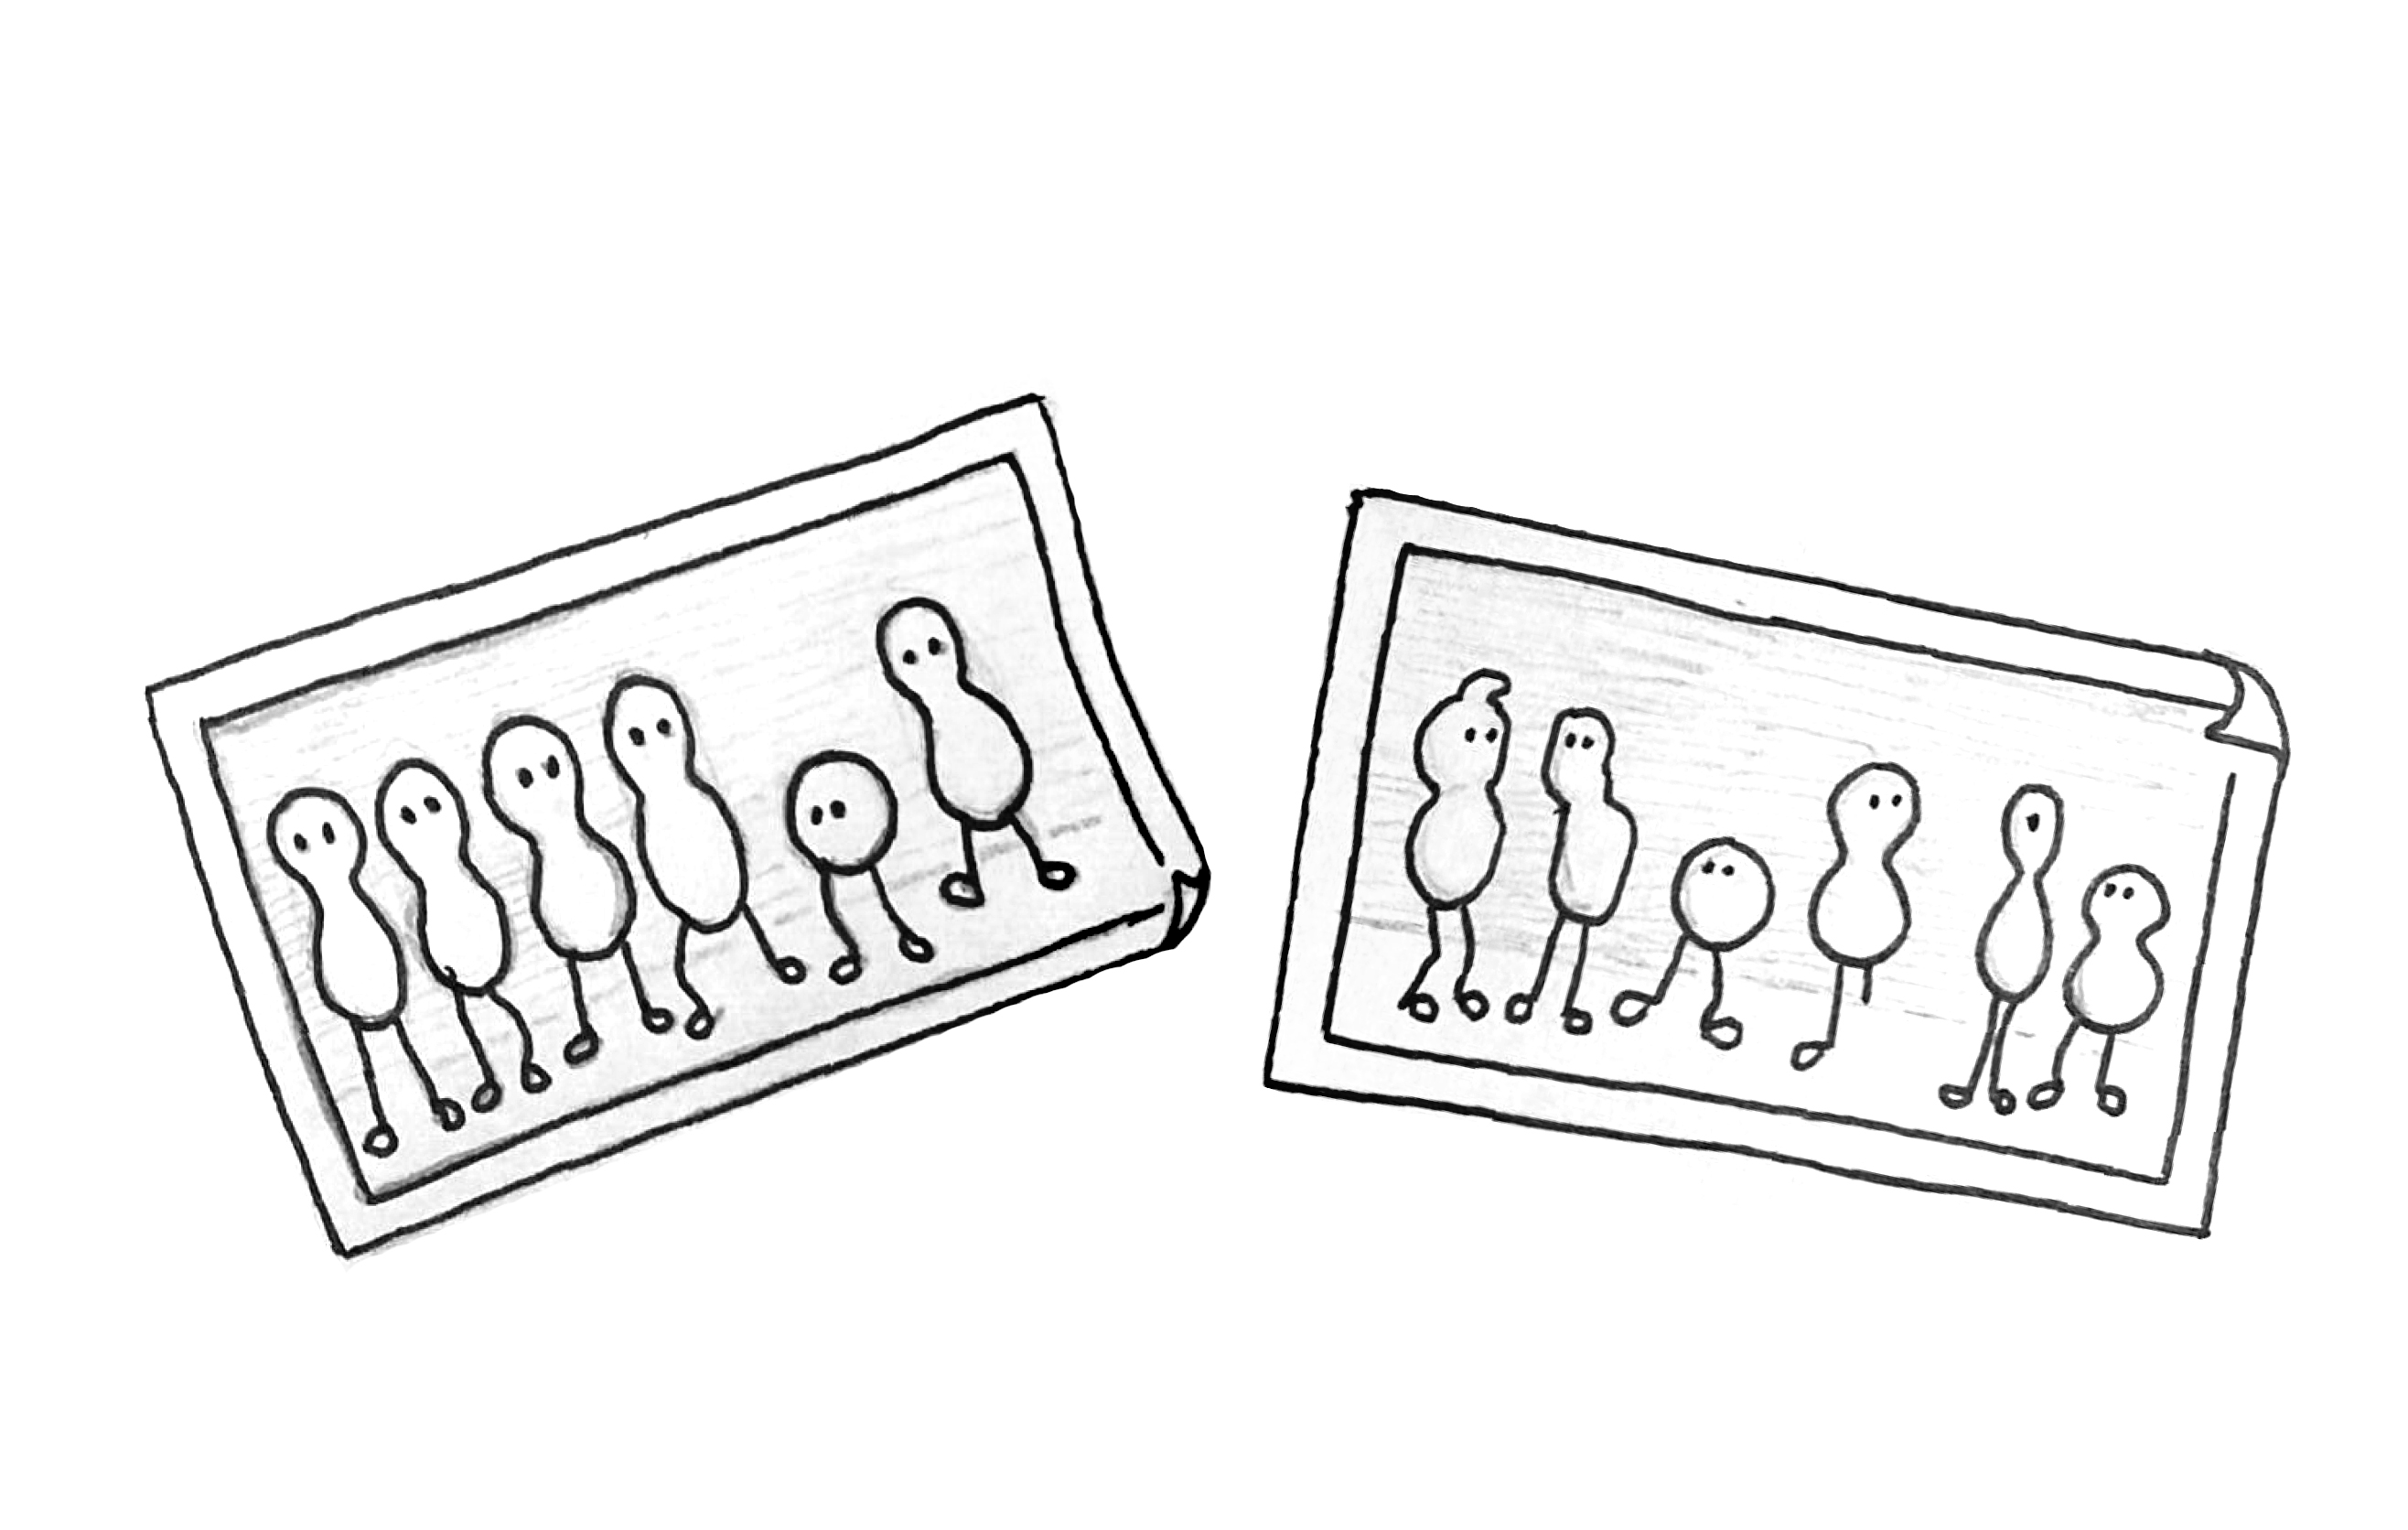 Illustration: Two images, one showing 5 beings that are alike and one that is different, the other one showing 6 different beings.